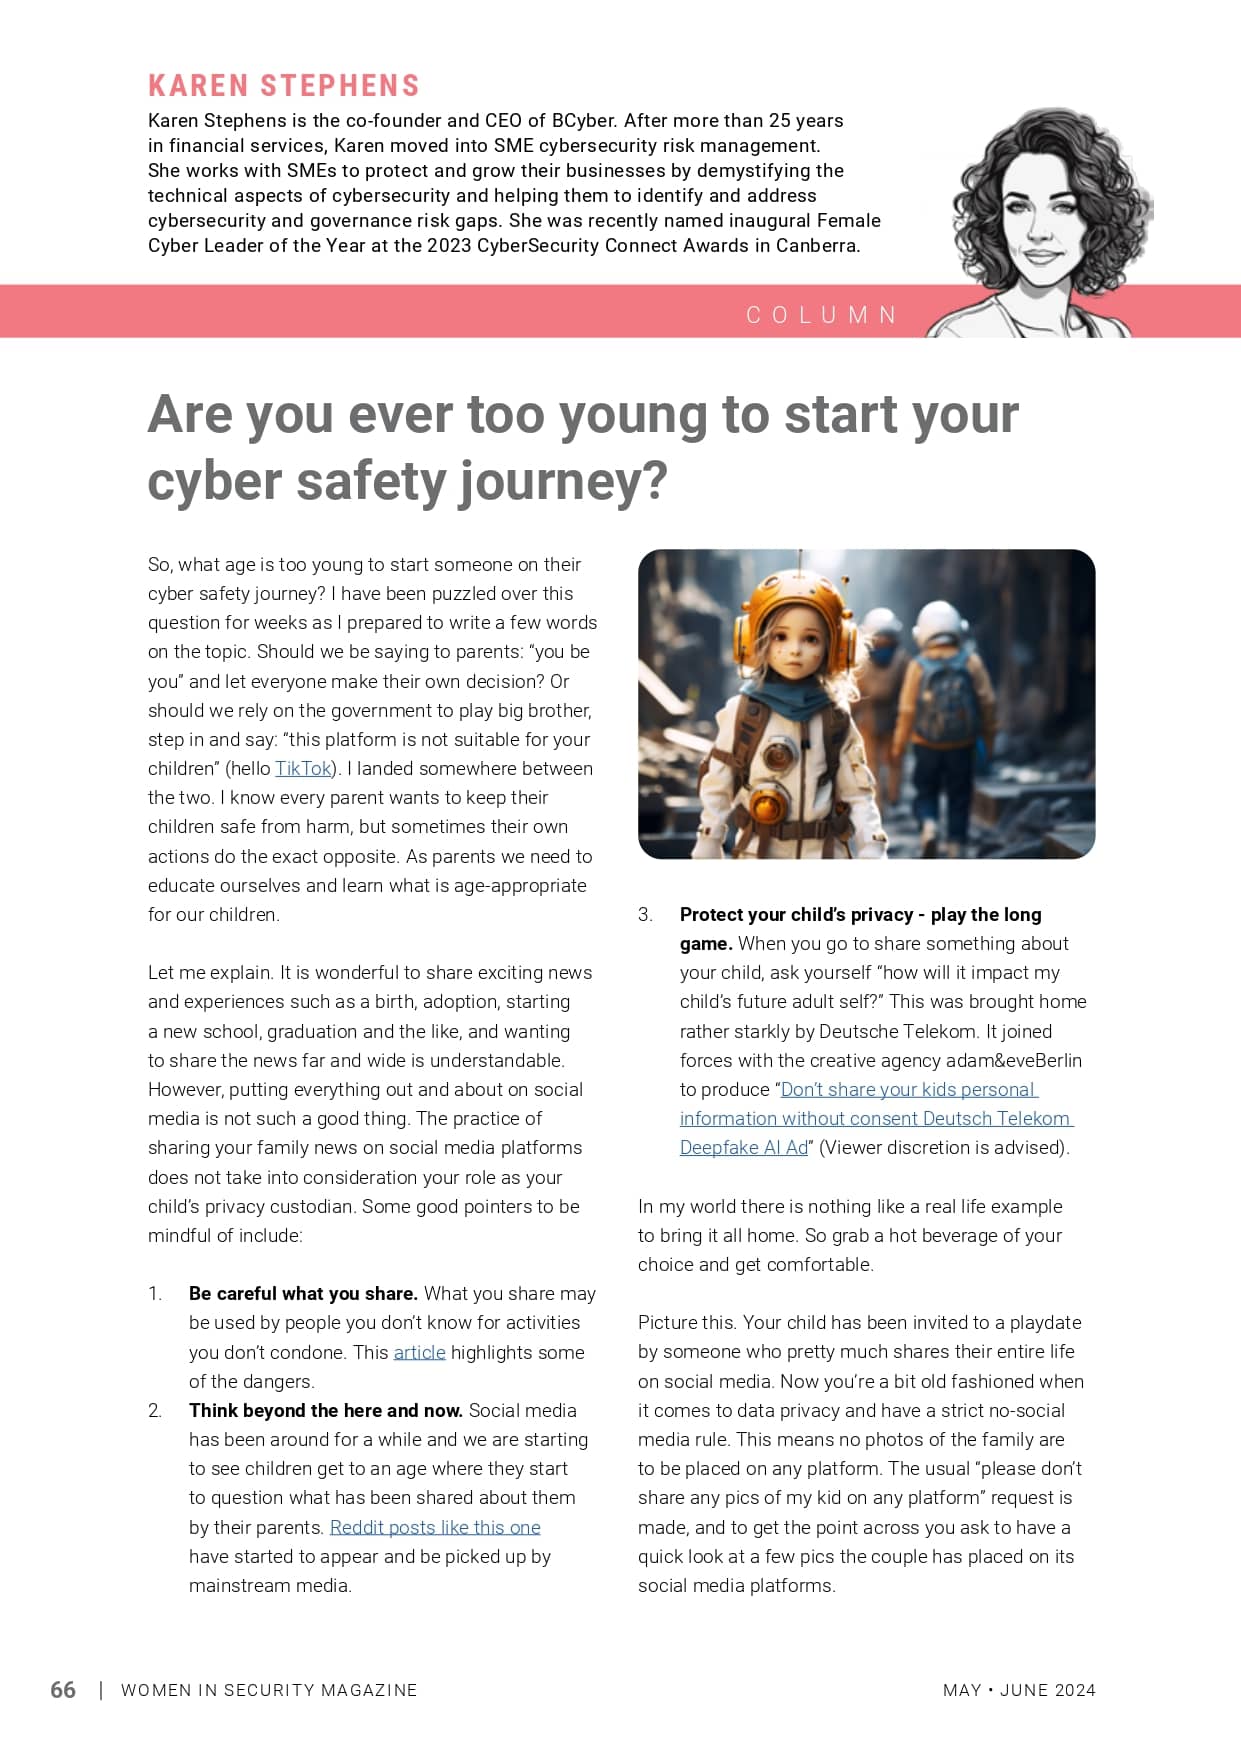 Are you ever too young to start your cyber safety journey? BCyber